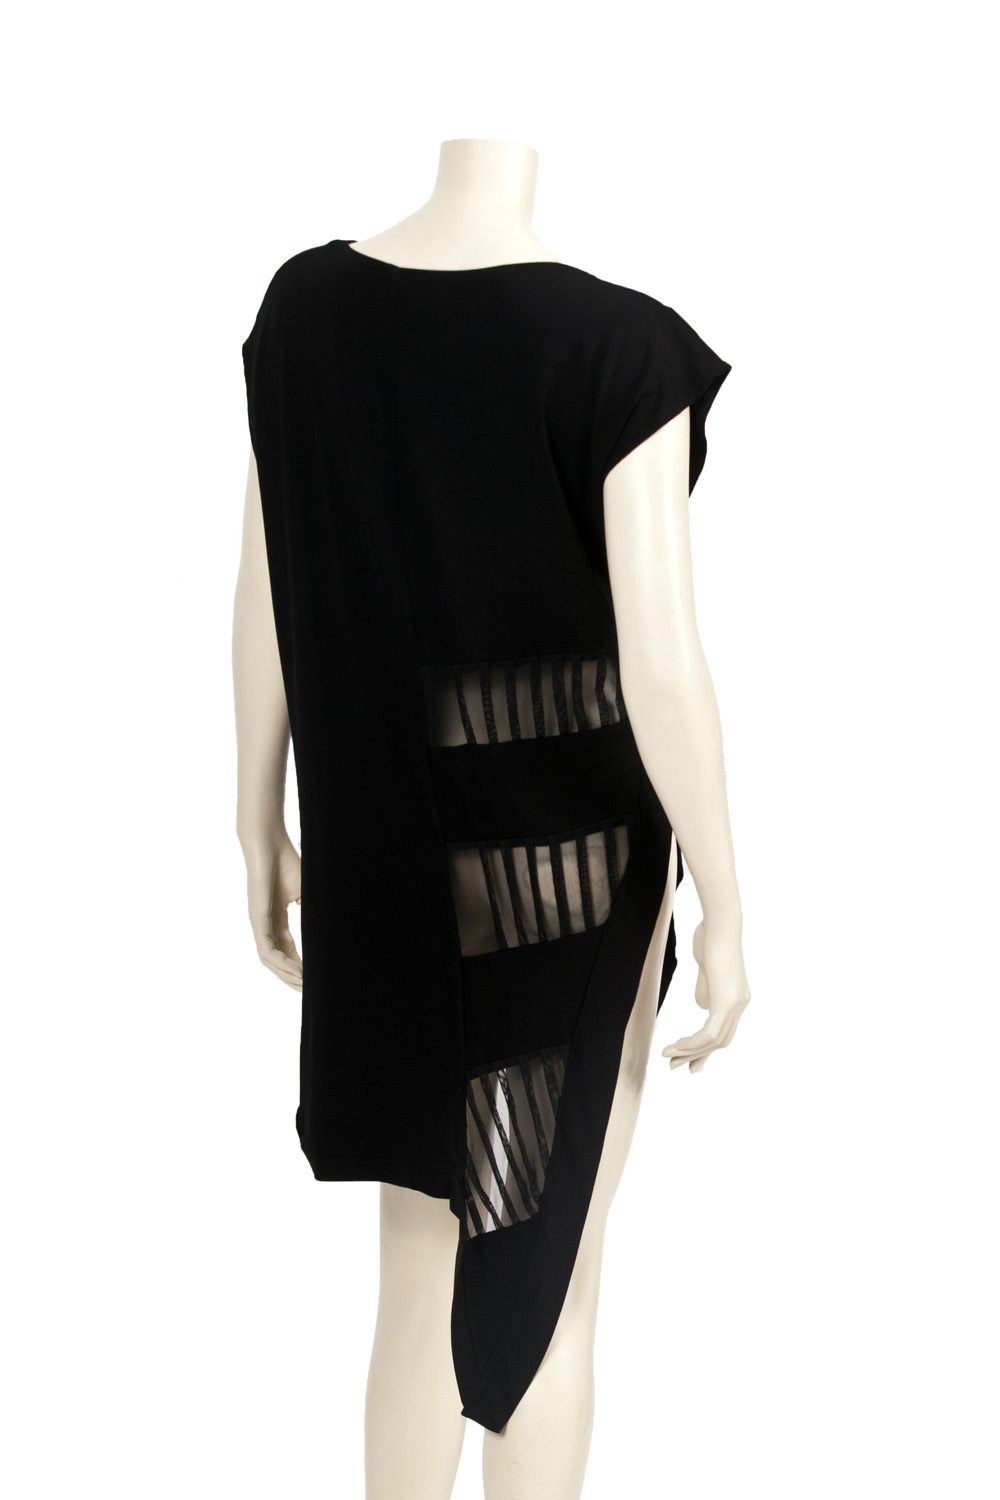 OUT OF STOCK/ Jersey Black Top With Asymmetric Cut | Tata Fashion